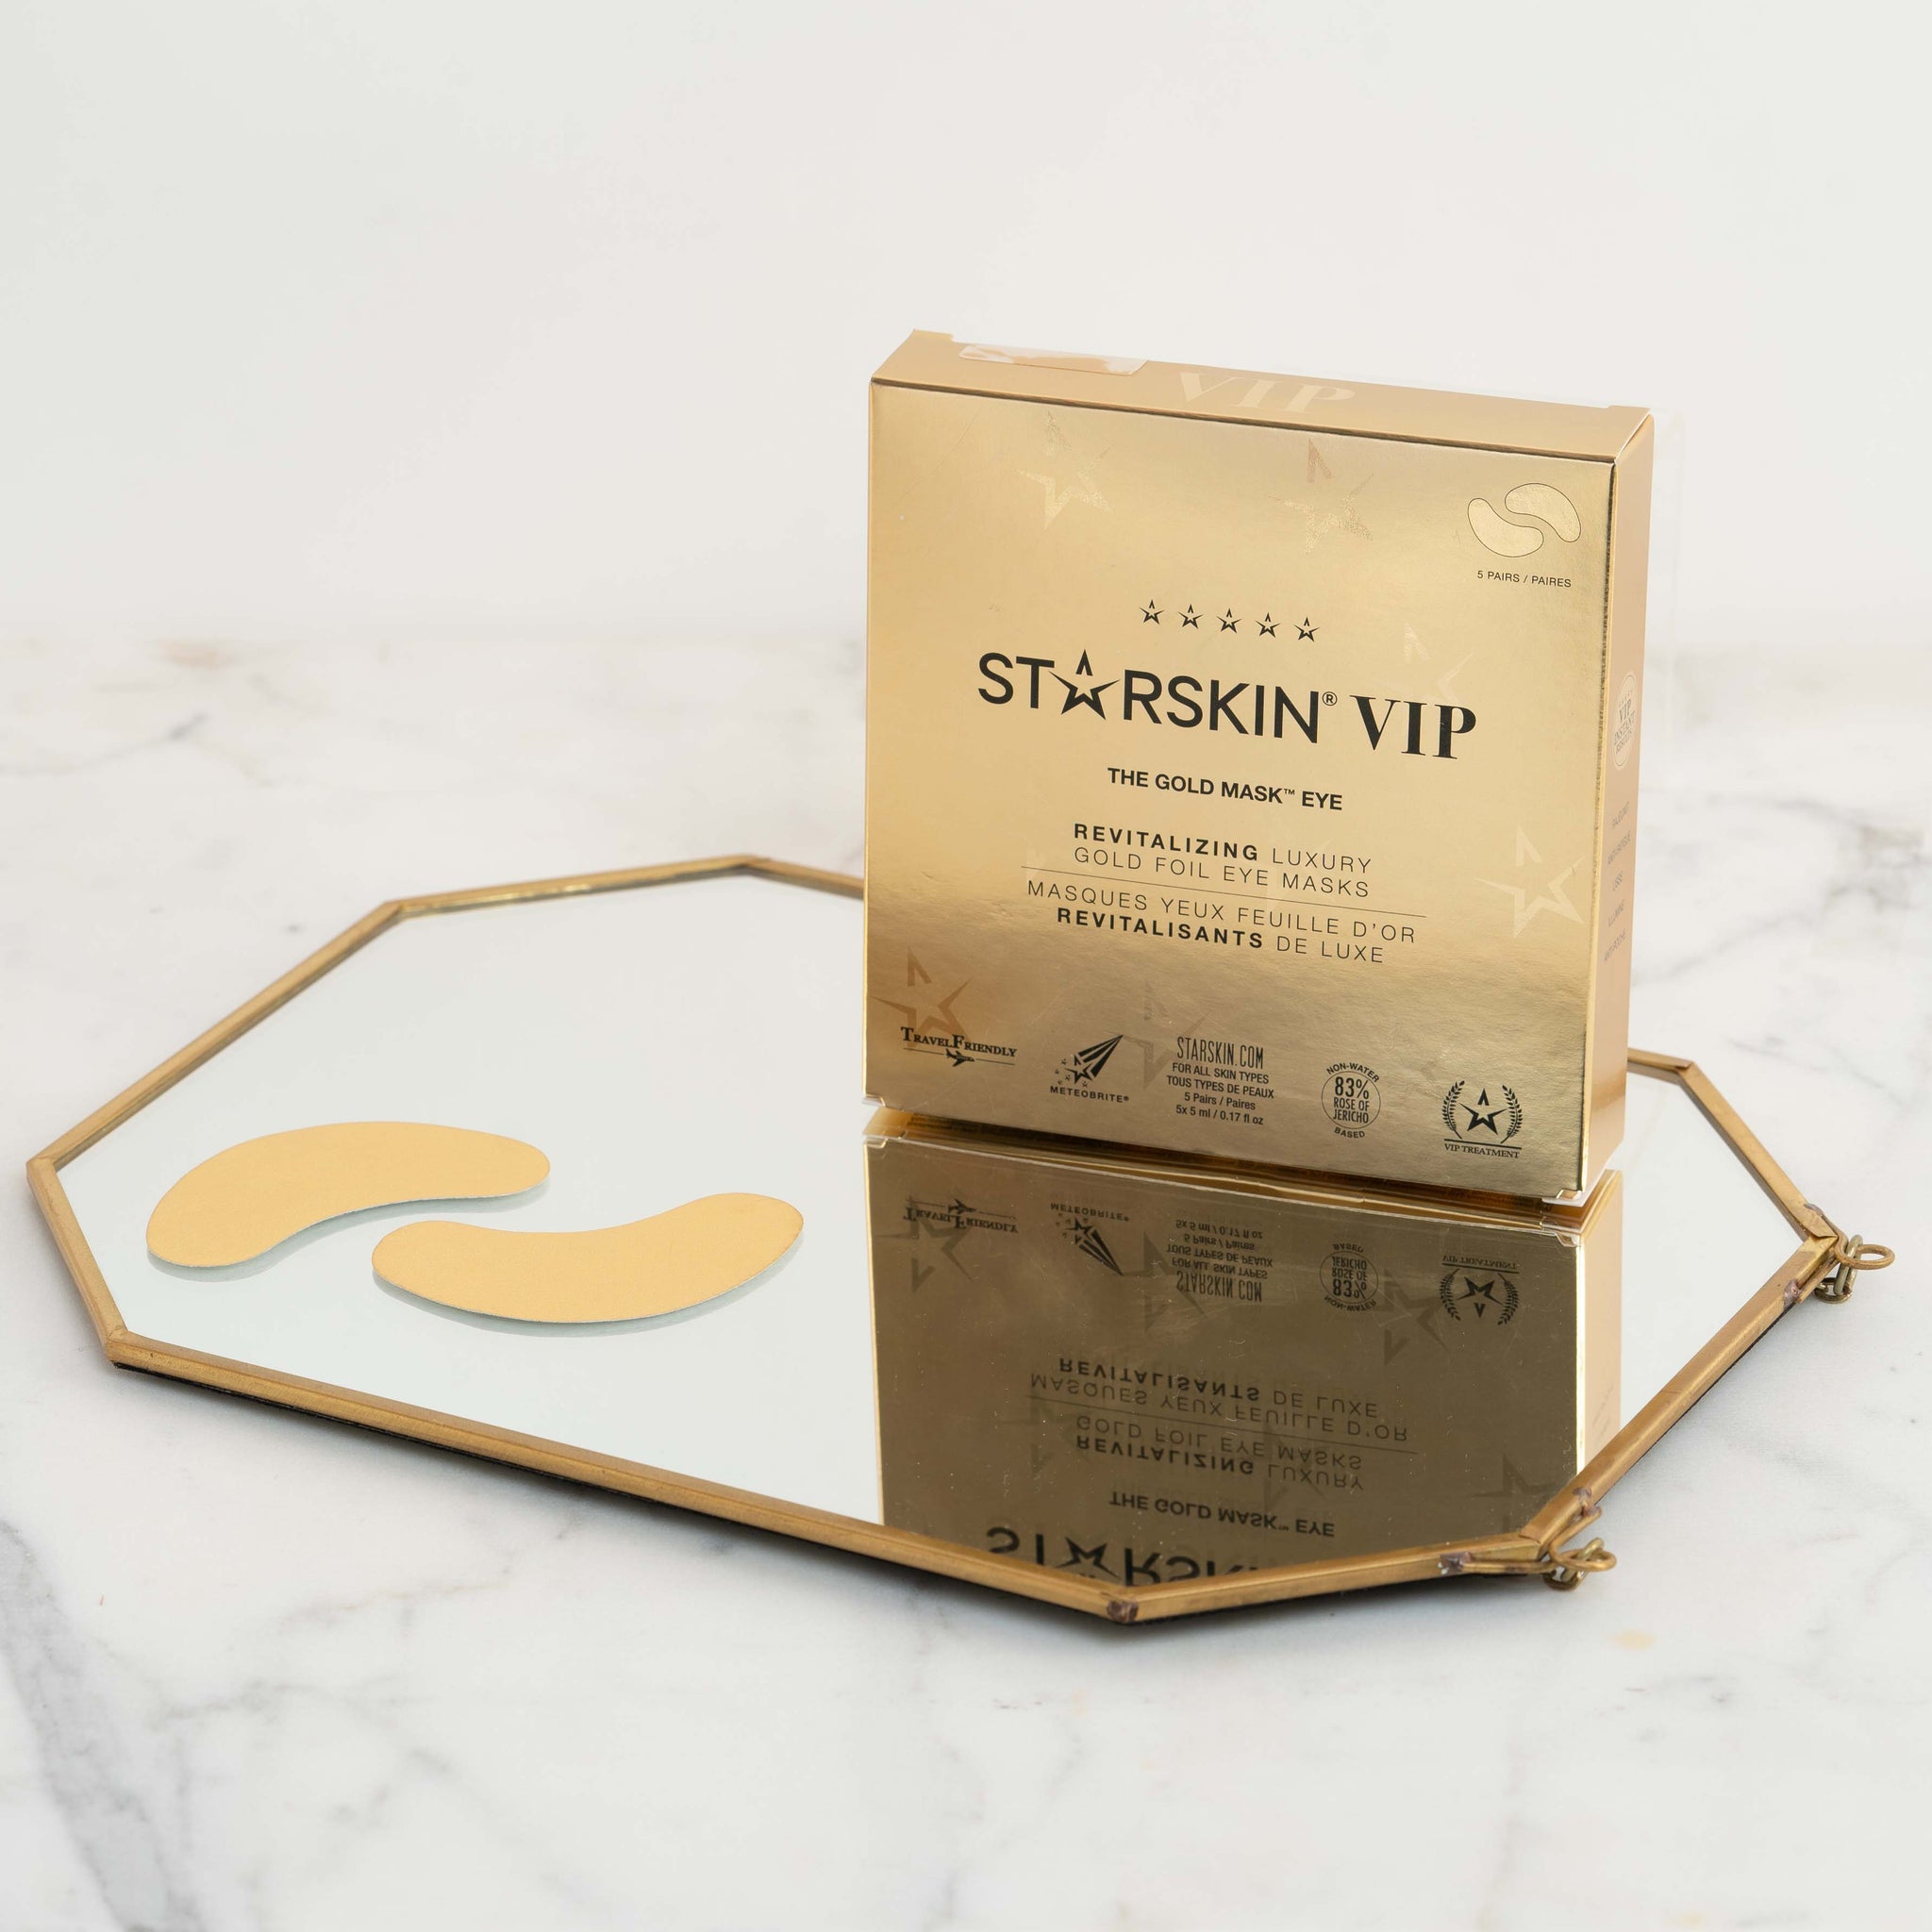 Starskin gold eye mask product packaging on top of a small mirror. Next to the packaging on the mirror are the two eye patches. The mirror is laying on a marble background.